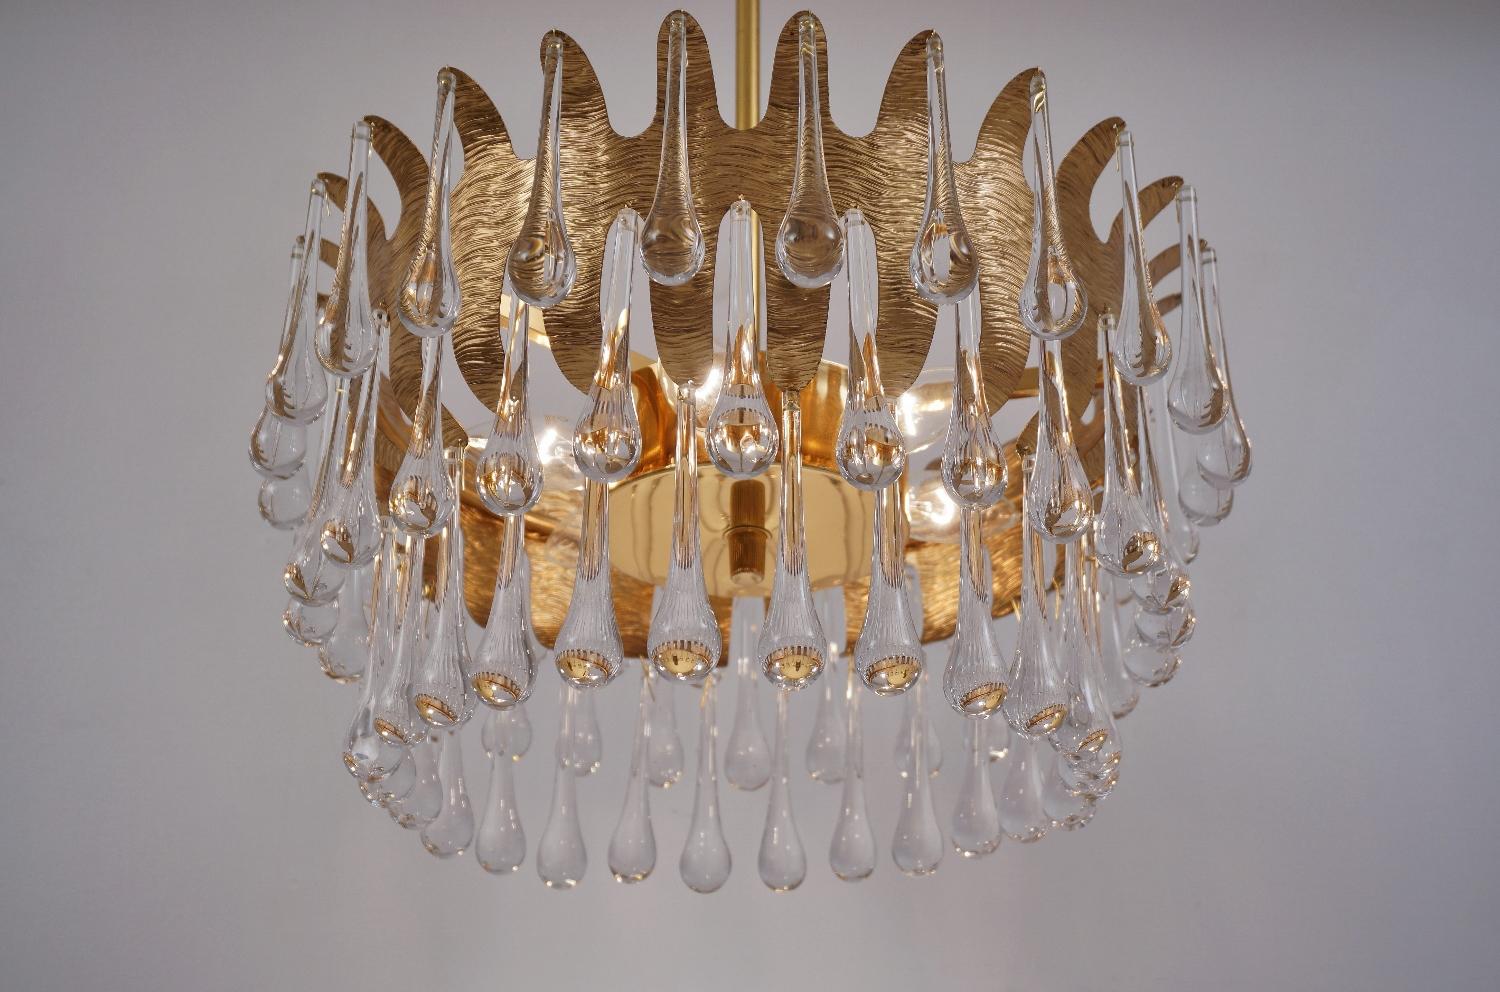 Palwa Chandelier Gold Plated Gilt Brass and Crystal by Ernst Palme, 1960s German For Sale 2